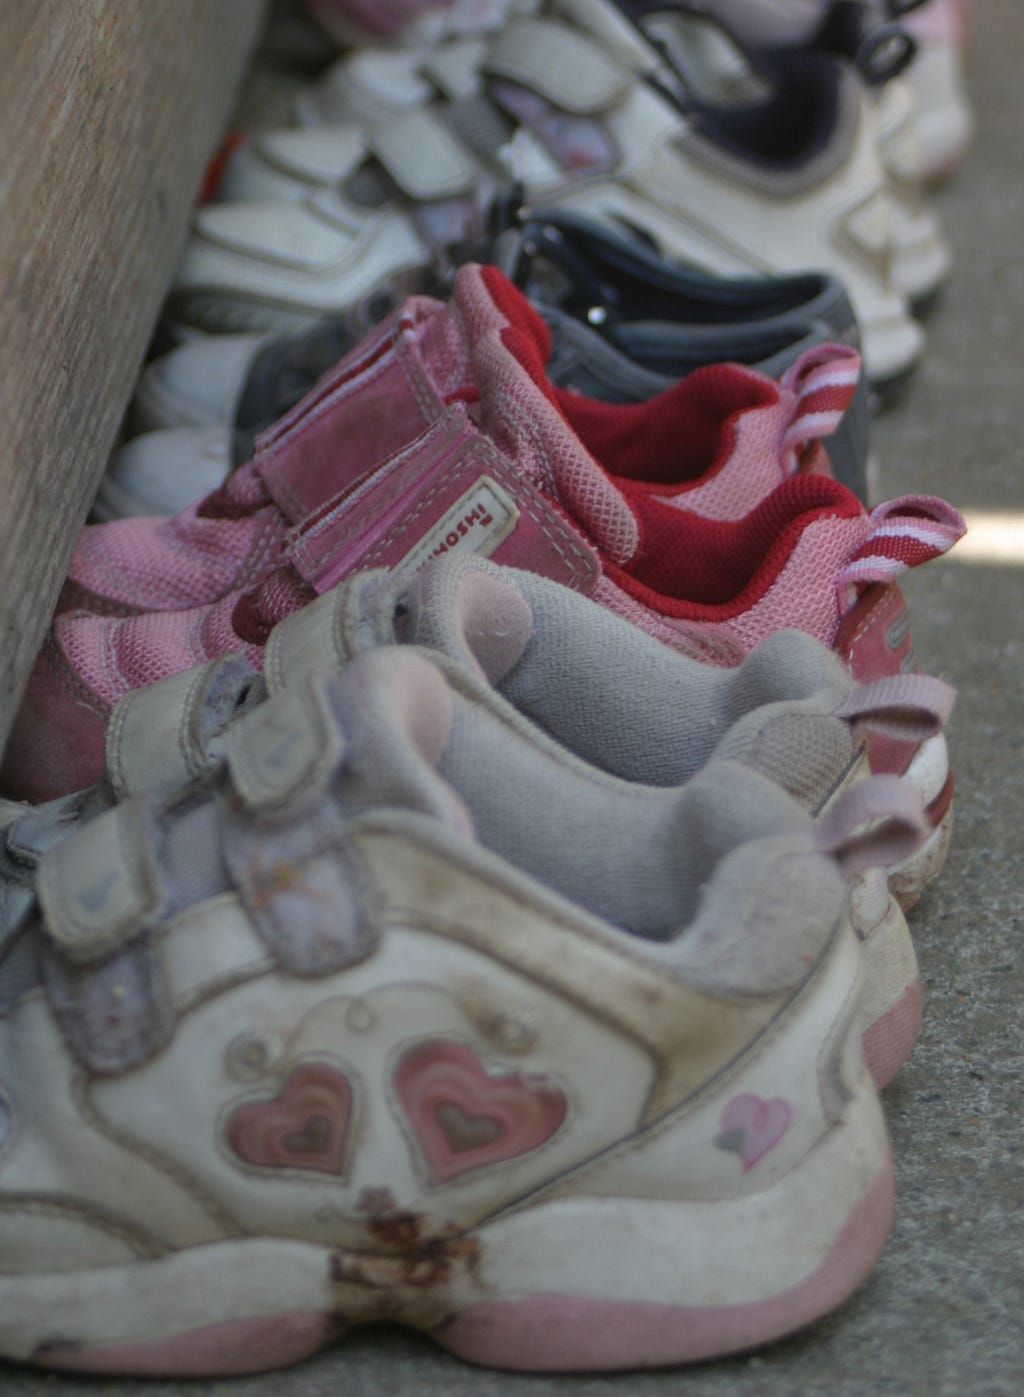 Five pairs of children’s shoes stand empty in a line.